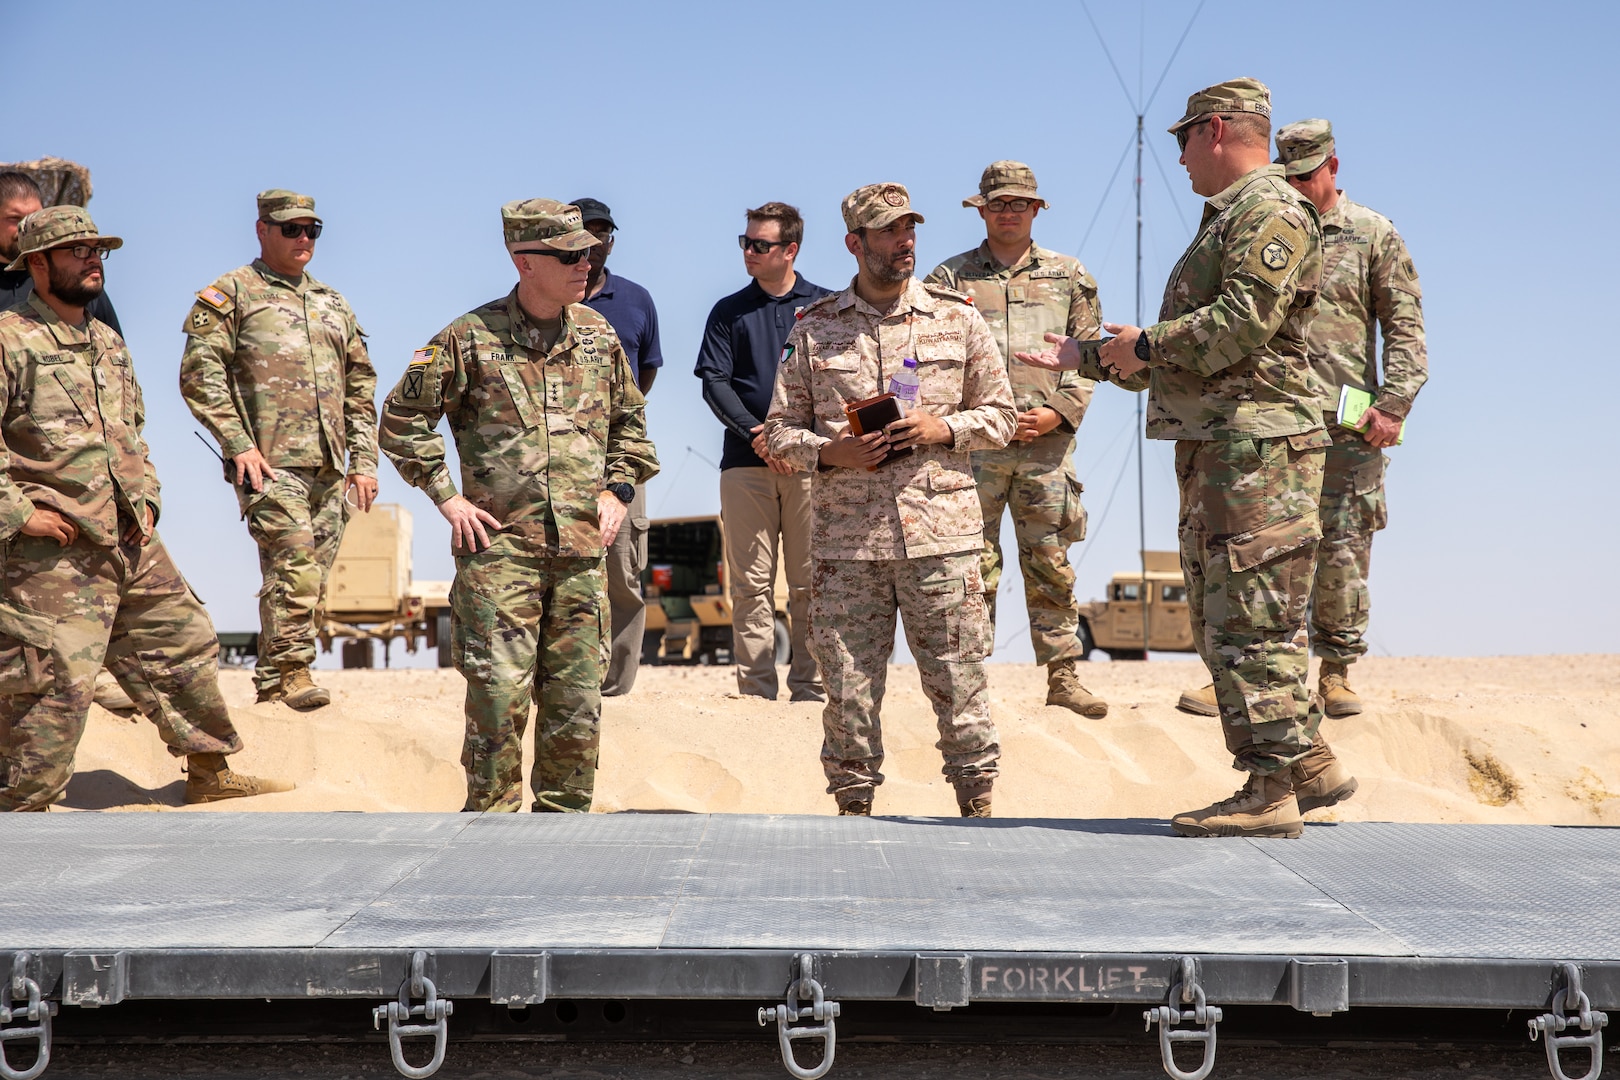 Lt. Gen. Patrick Frank, commanding general of U.S. Army Central, and Col. Fahad A. Buresli with the Kuwait Land Forces receive a capabilities briefing during the USARCENT autonomous vehicle demonstration at the Udari Range Complex near Camp Buerhing, Kuwait, on July 25, 2023. The 371st Sustainment Brigade is currently testing three semi-autonomous palletized load systems, or PLS. The bold measures USARCENT intends to pursue regarding innovation and experimentation will enable USARCENT to campaign creatively, contribute to cross-domain integrated deterrence, and support the effort to build enduring advantages. (U.S. Army Reserve photo by Spc. David Campos-Contreras)